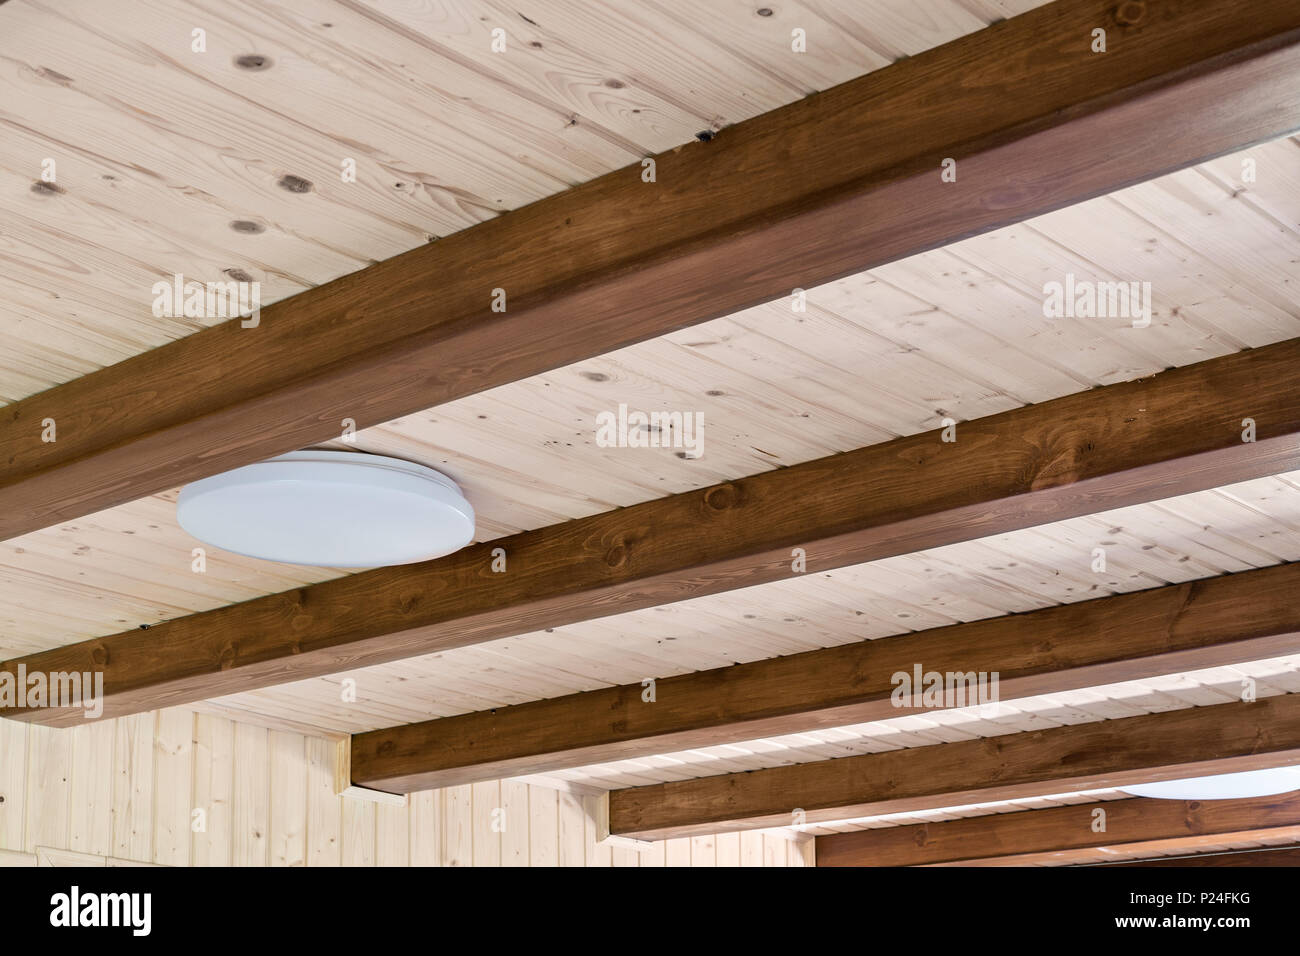 Rustic House Ceiling With Wide Wooden Beam Support Country Home